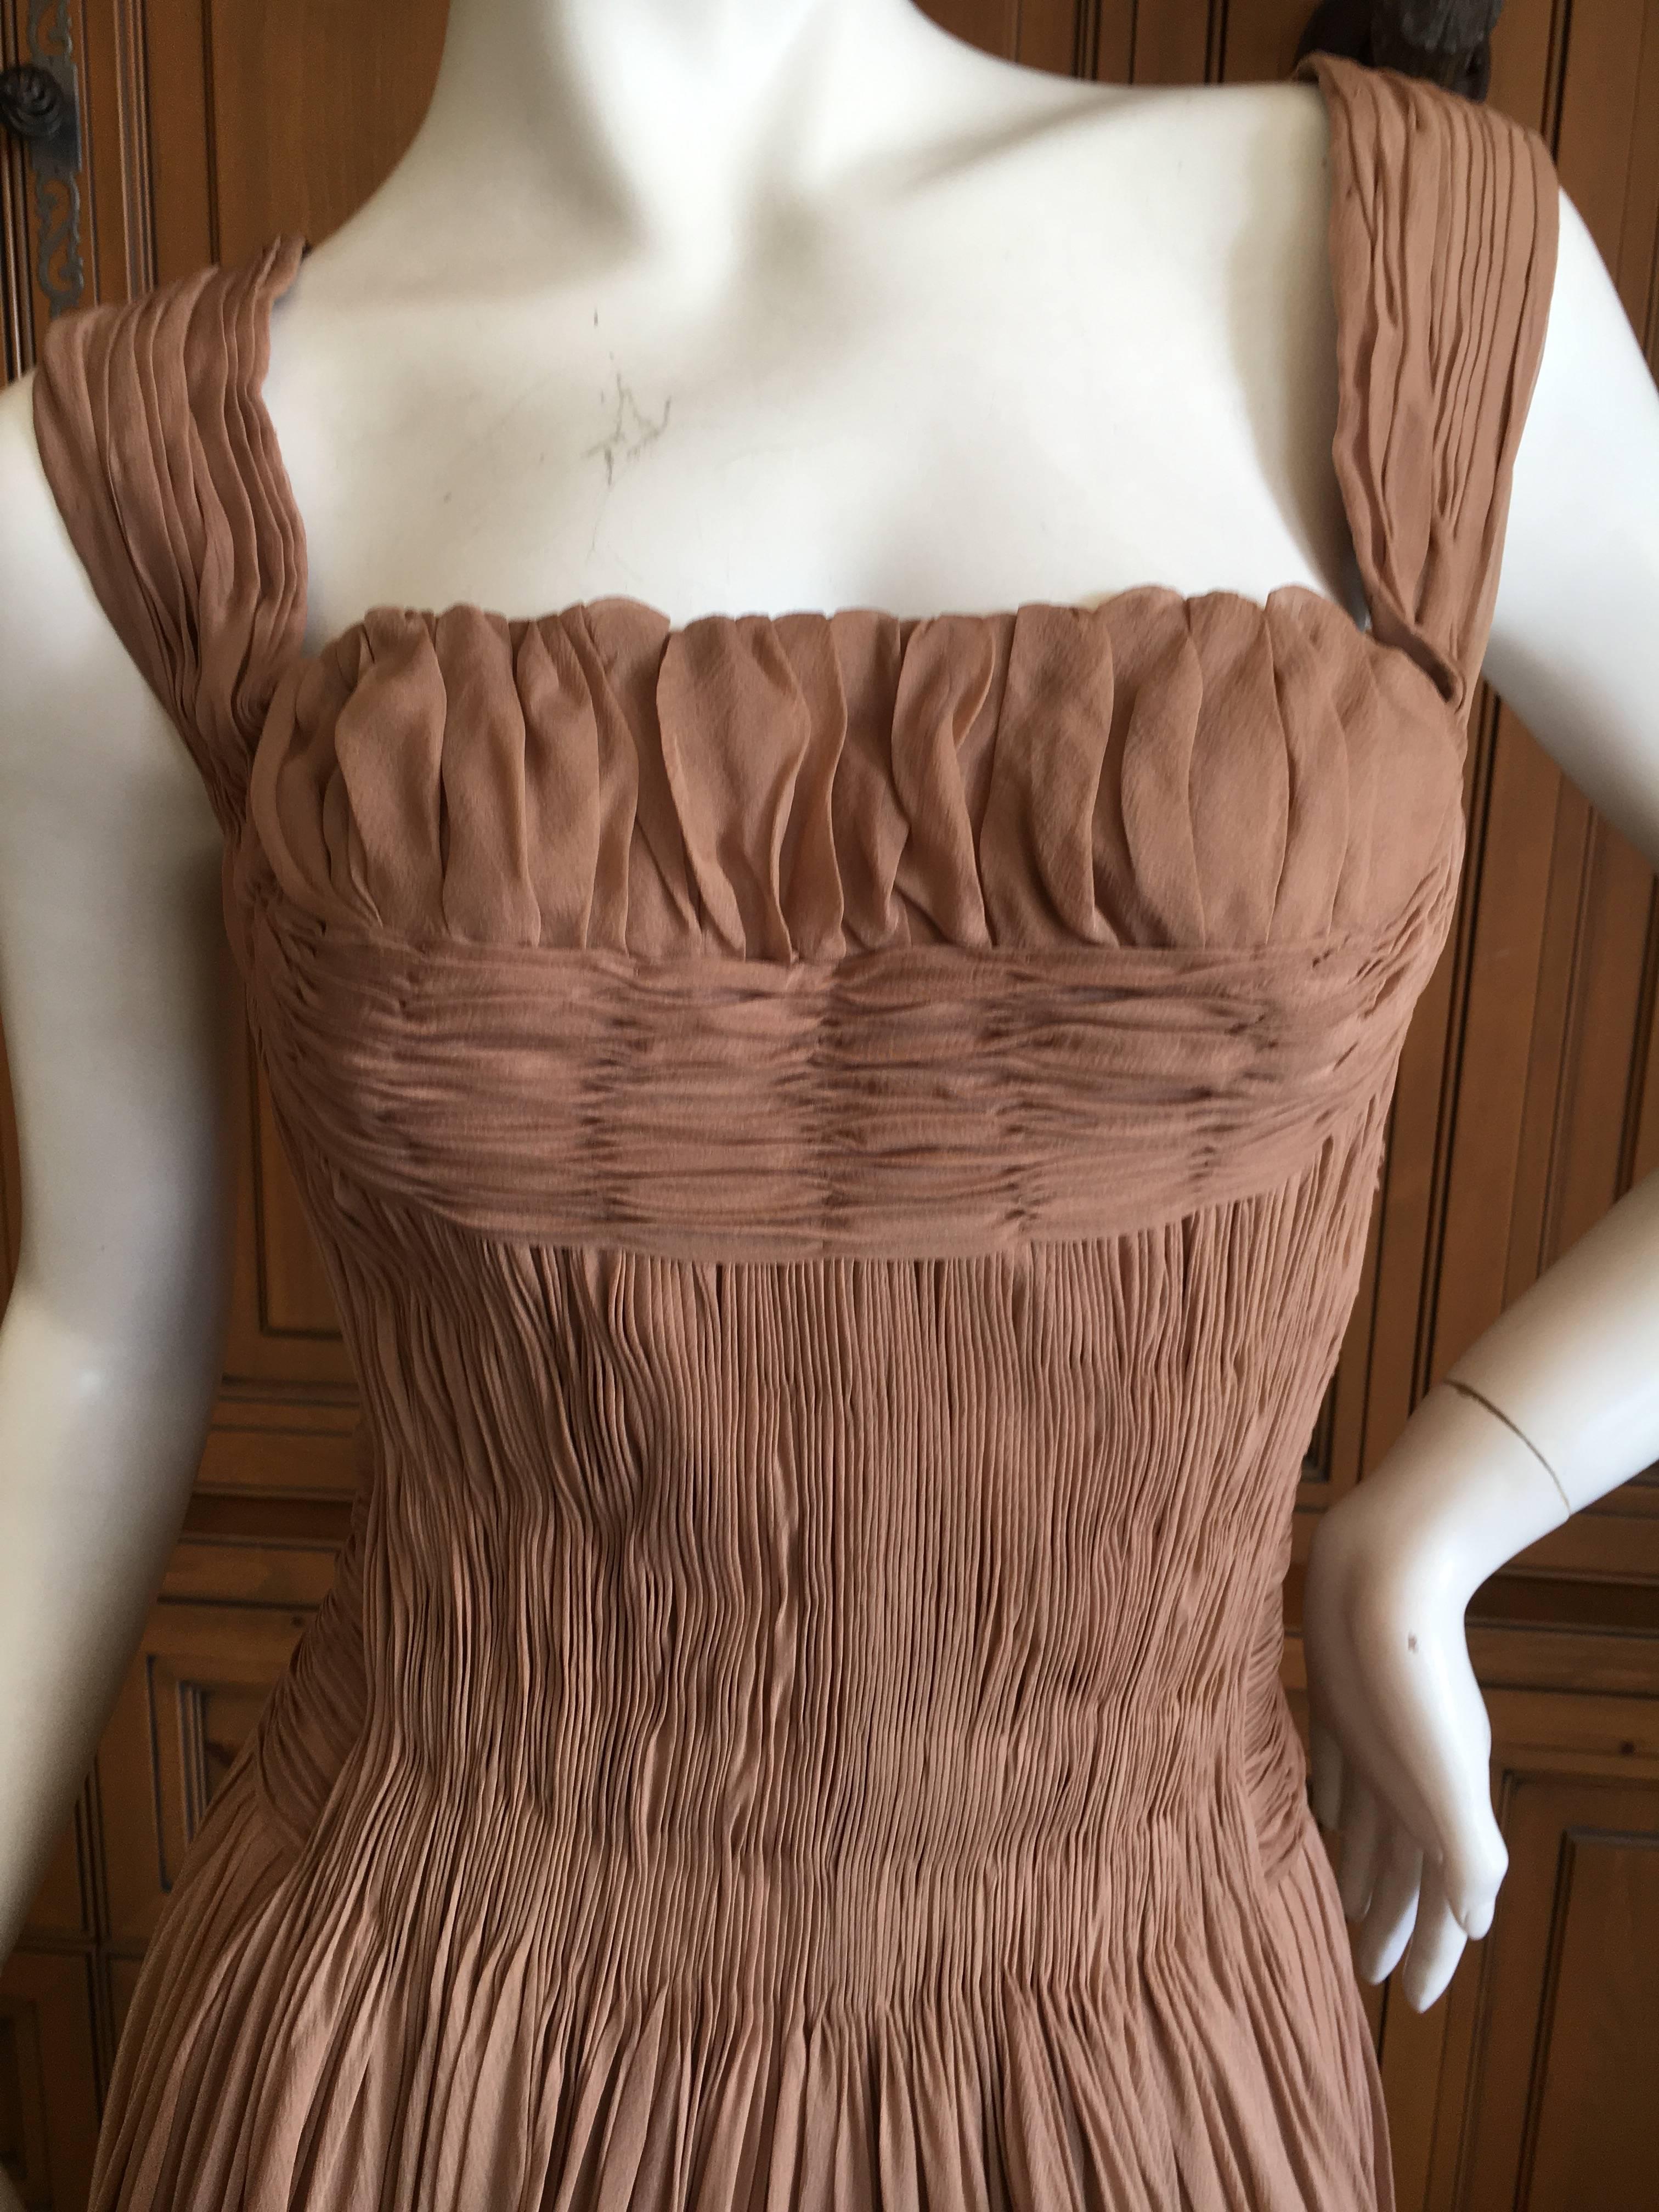 Carven Paris Haute Couture 1949 Pin Tuck Pleated Evening Dress In Excellent Condition For Sale In Cloverdale, CA